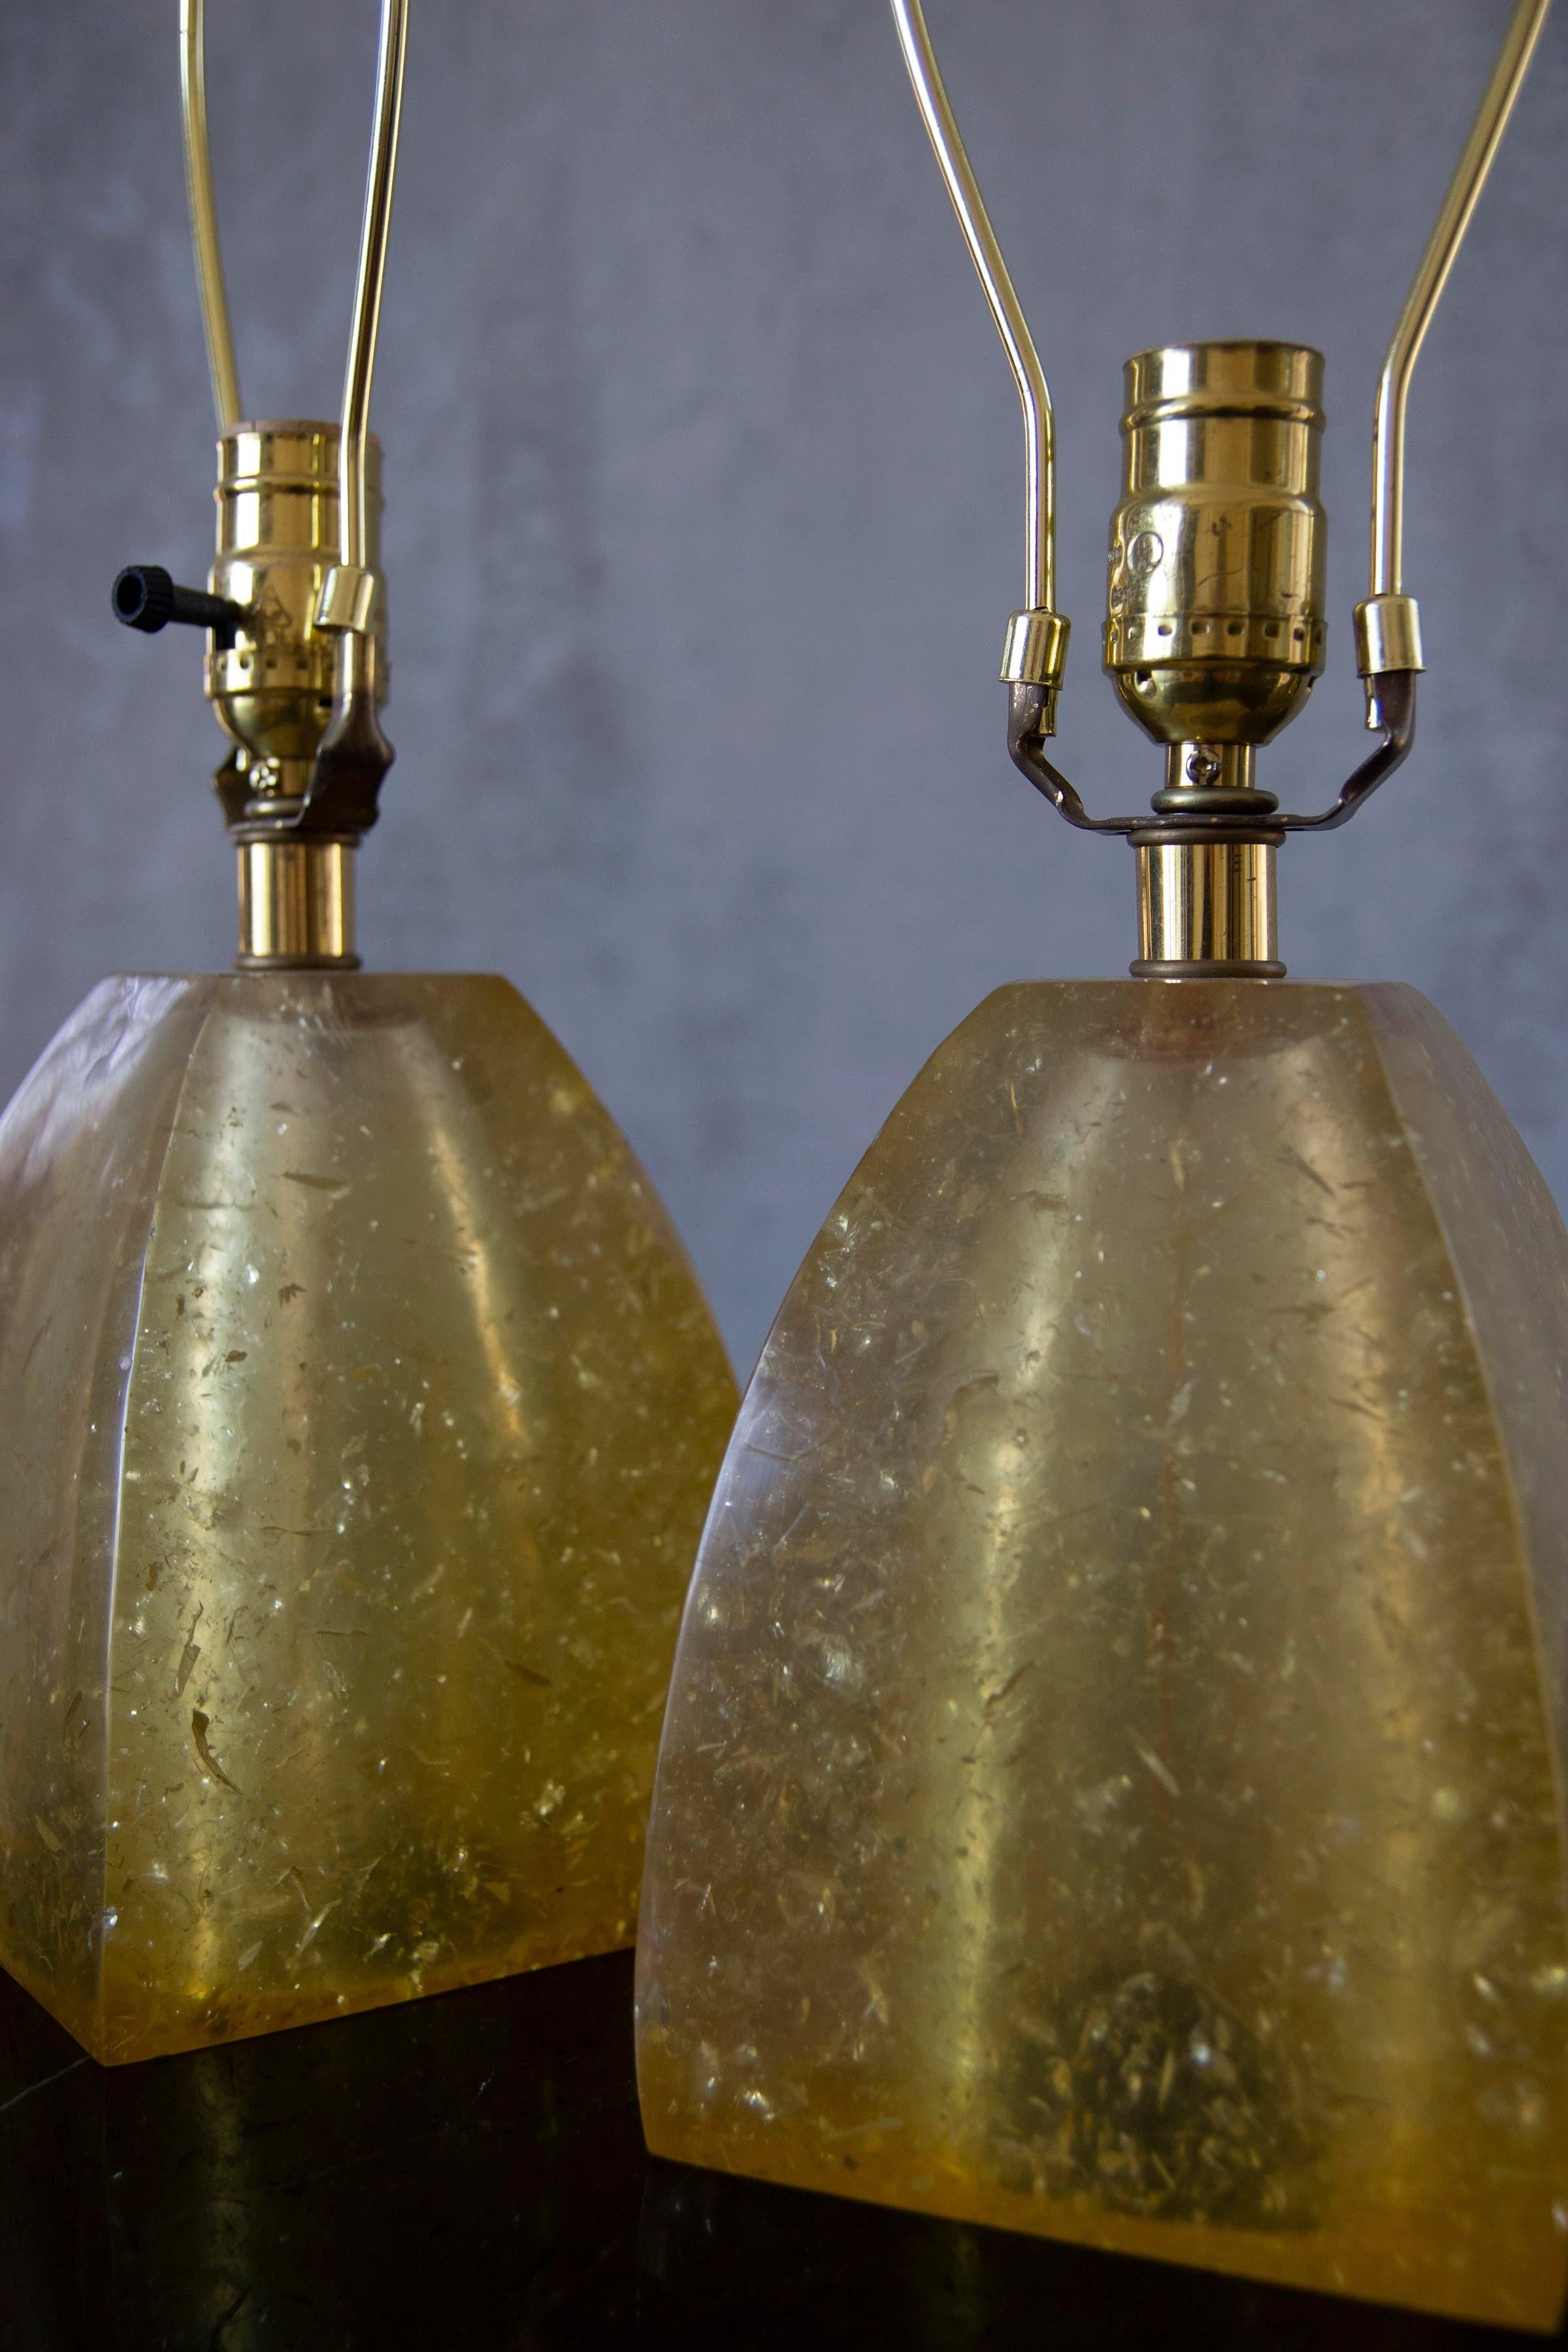 Mid-Century Modern 1960s Fractal Resin Mantel Lamps, Rewired - a Pair For Sale